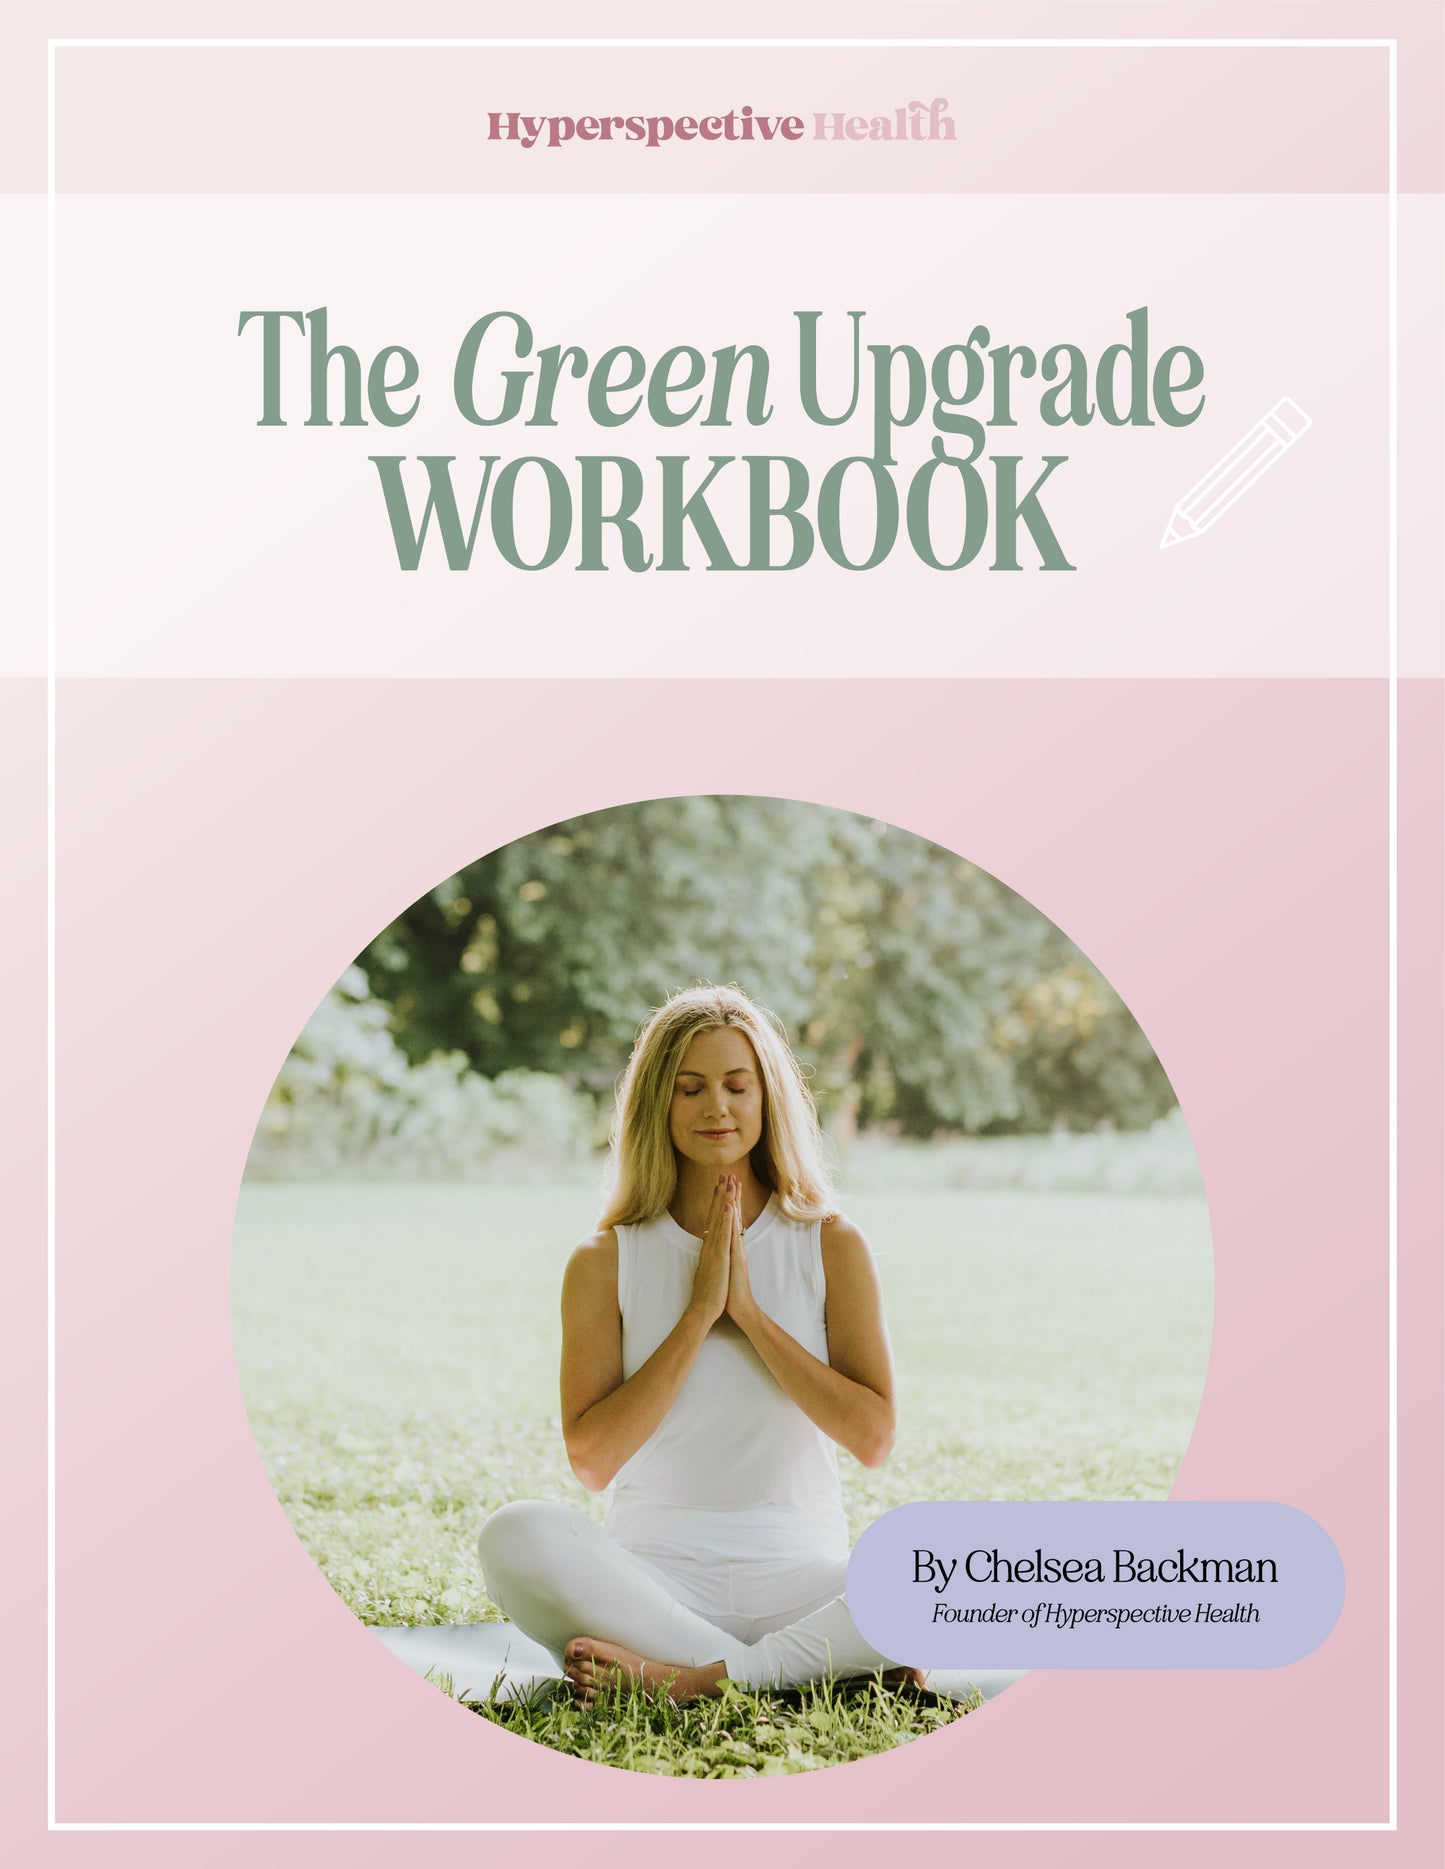 The Green Upgrade: How to take care of you and feel good inside and out using plant-based practices and holistic principles